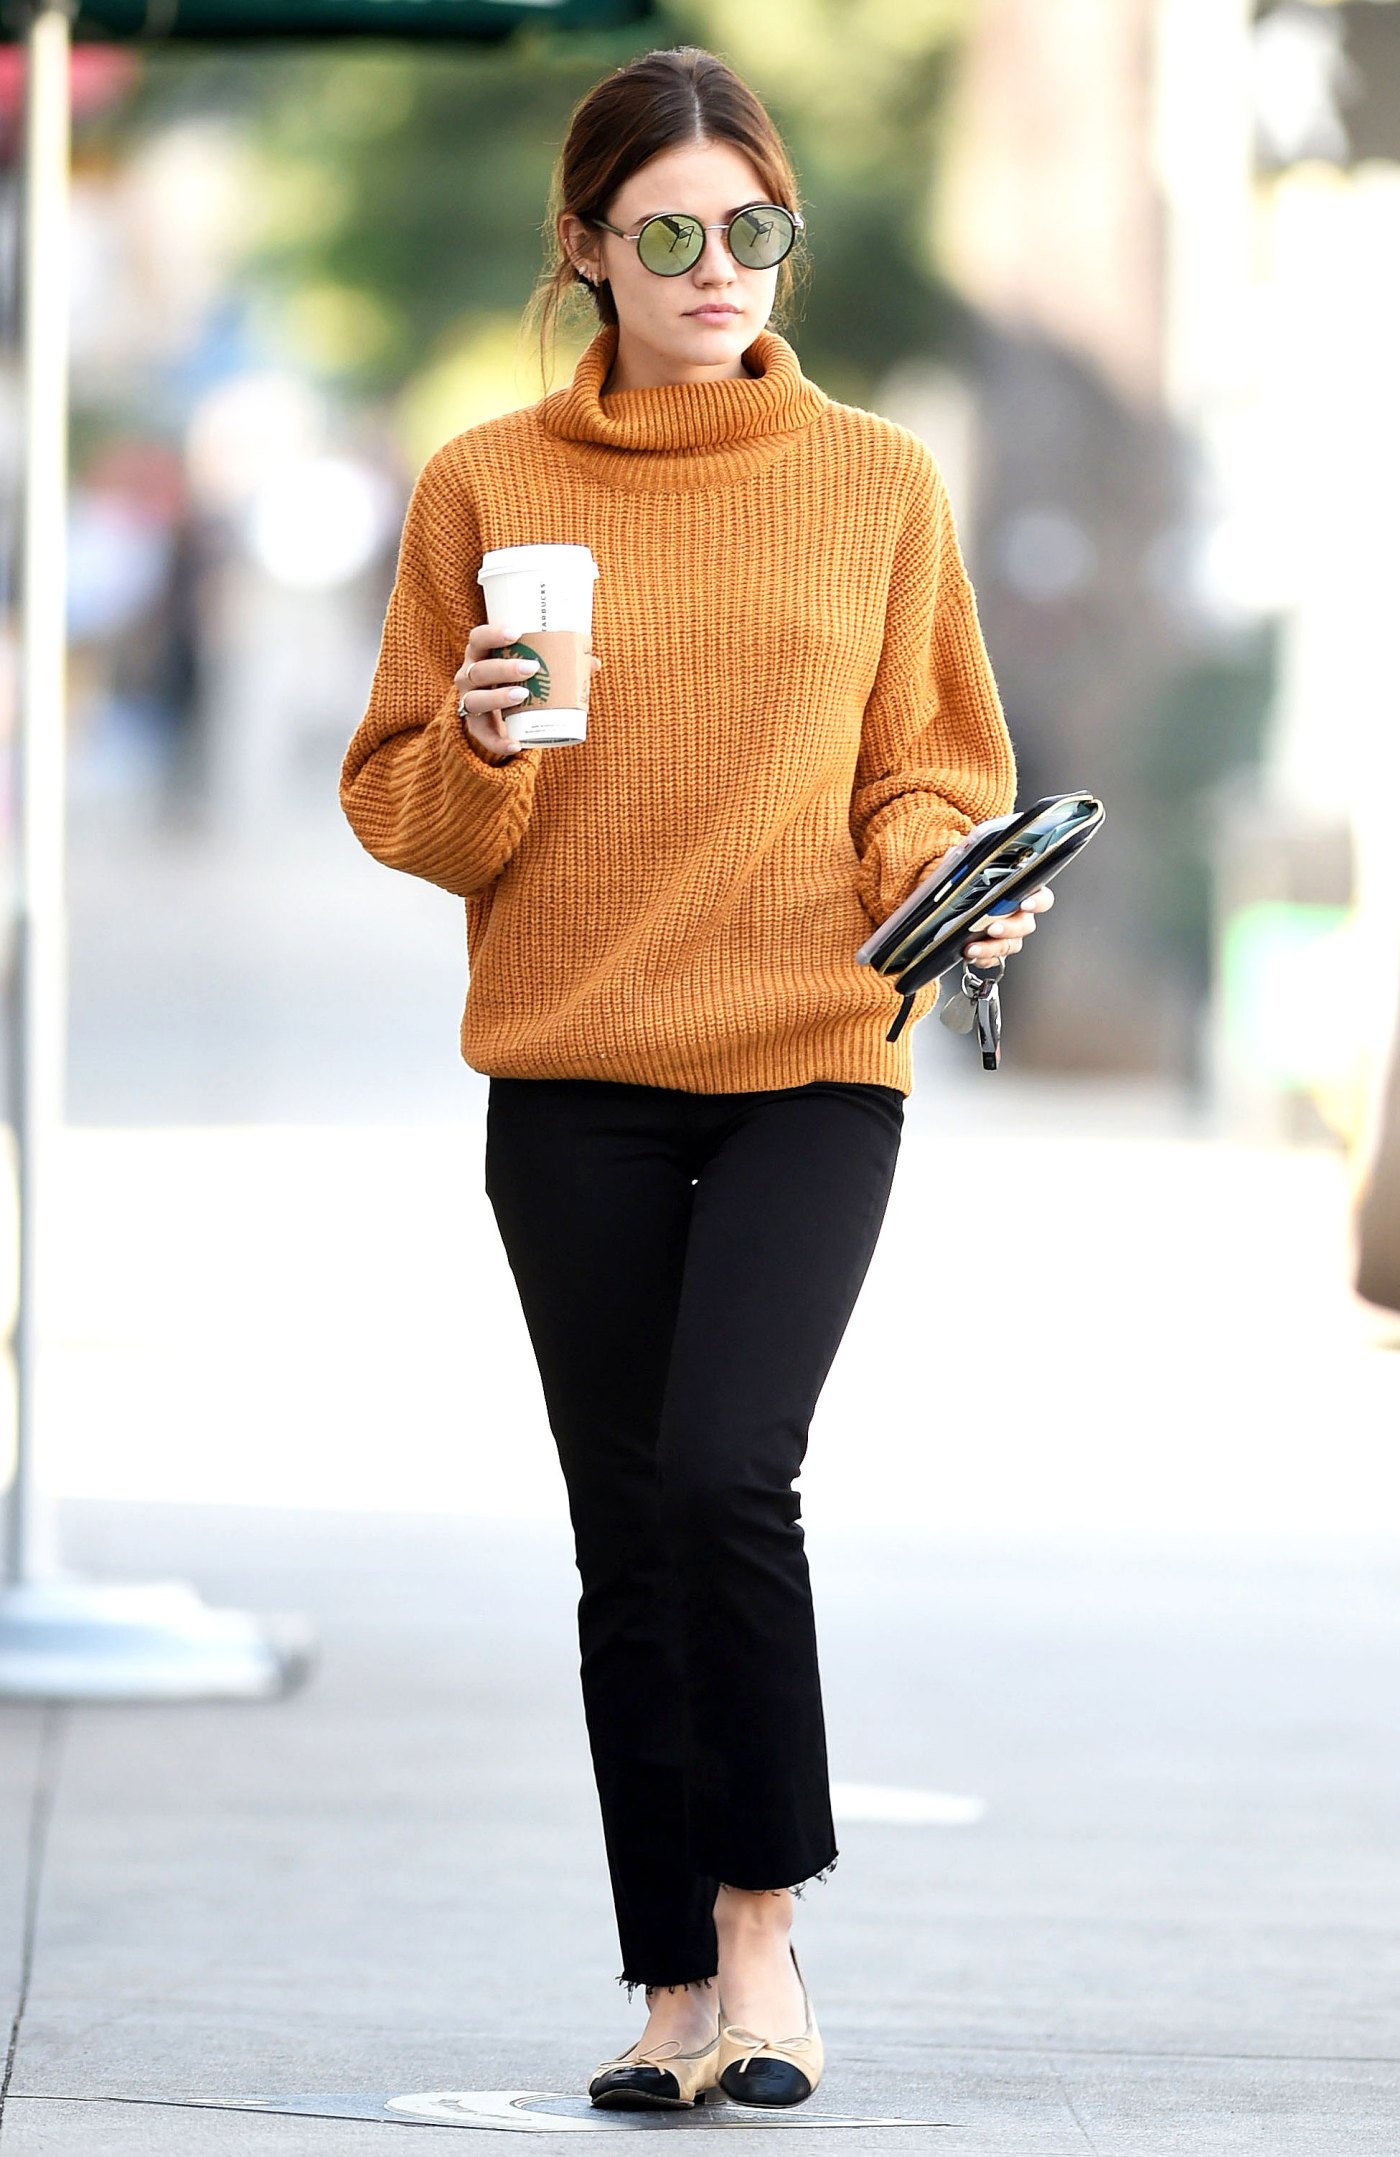 Taylor S. and More Celebs Wear Pumpkin Spice–Colored Clothes